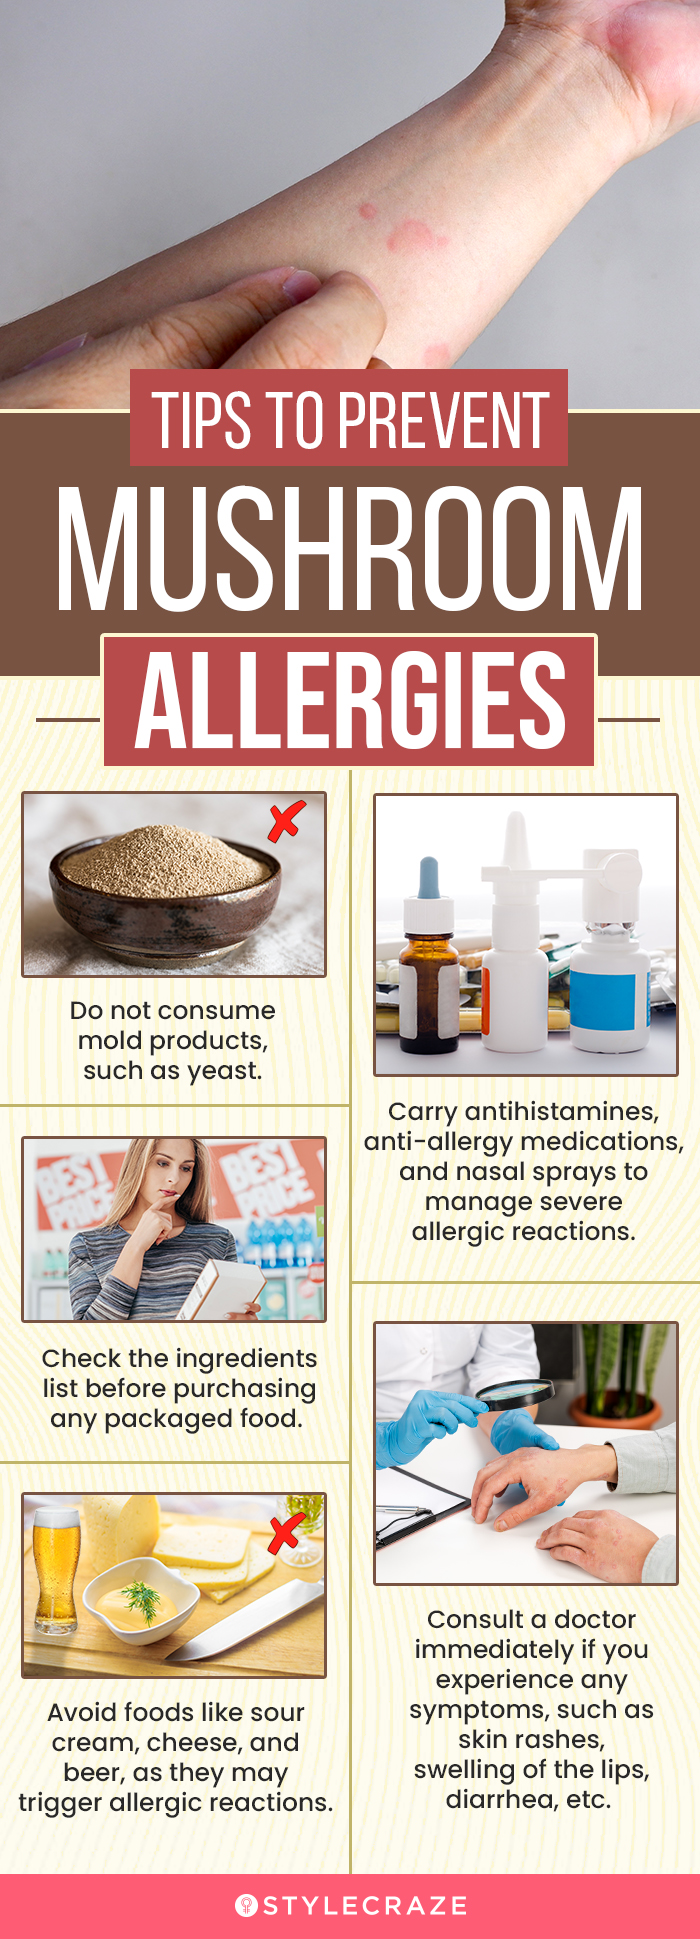 tips to prevent mushroom allergies (infographic)